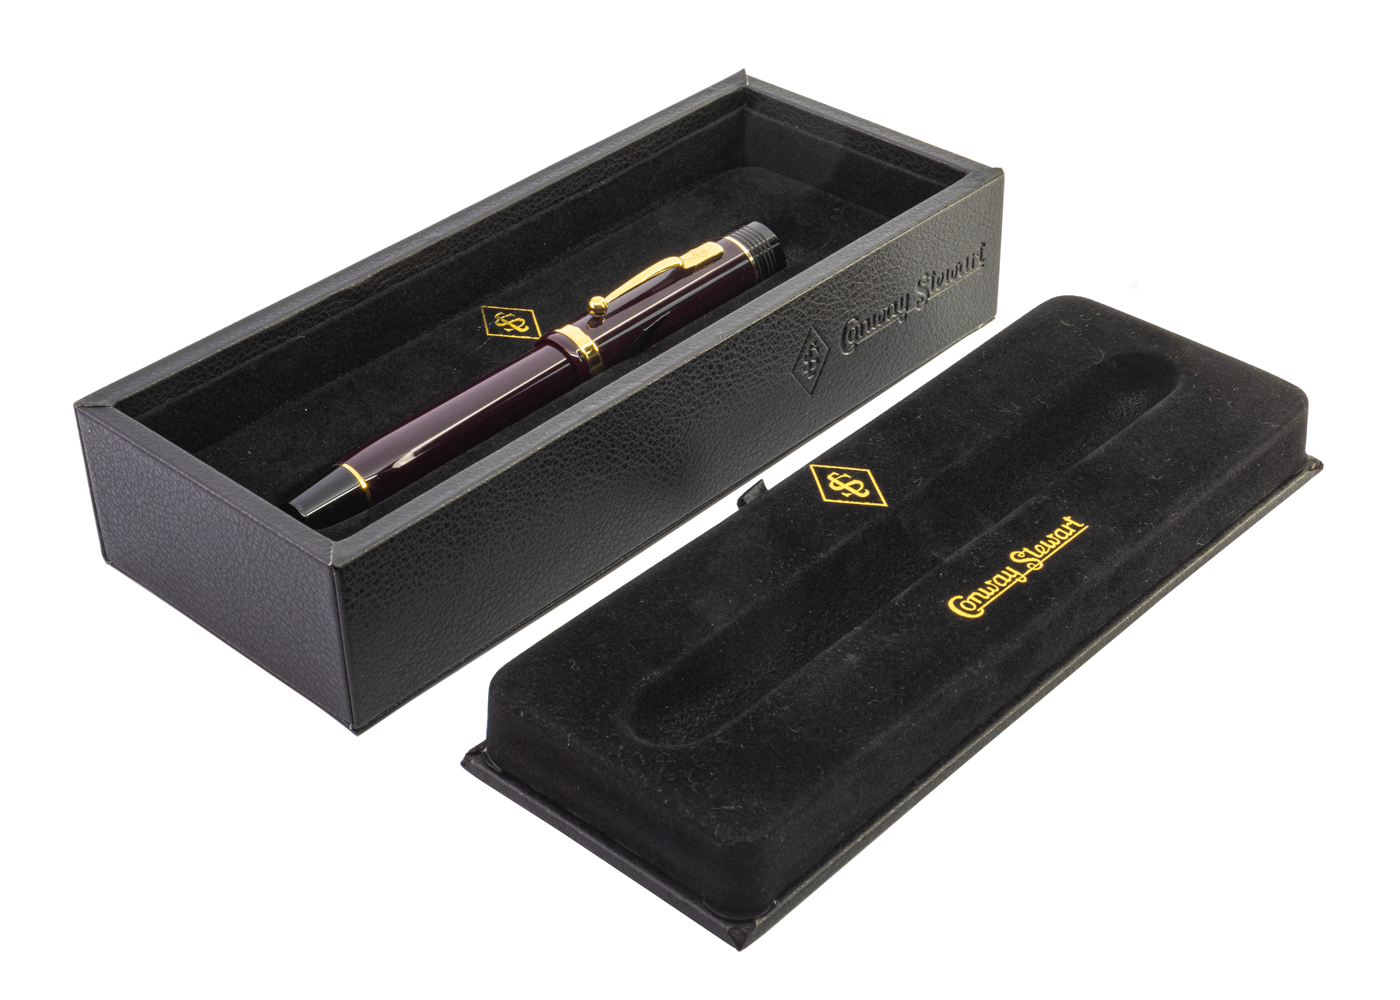 Conway Stewart Churchill Bordeaux with Gold Trim